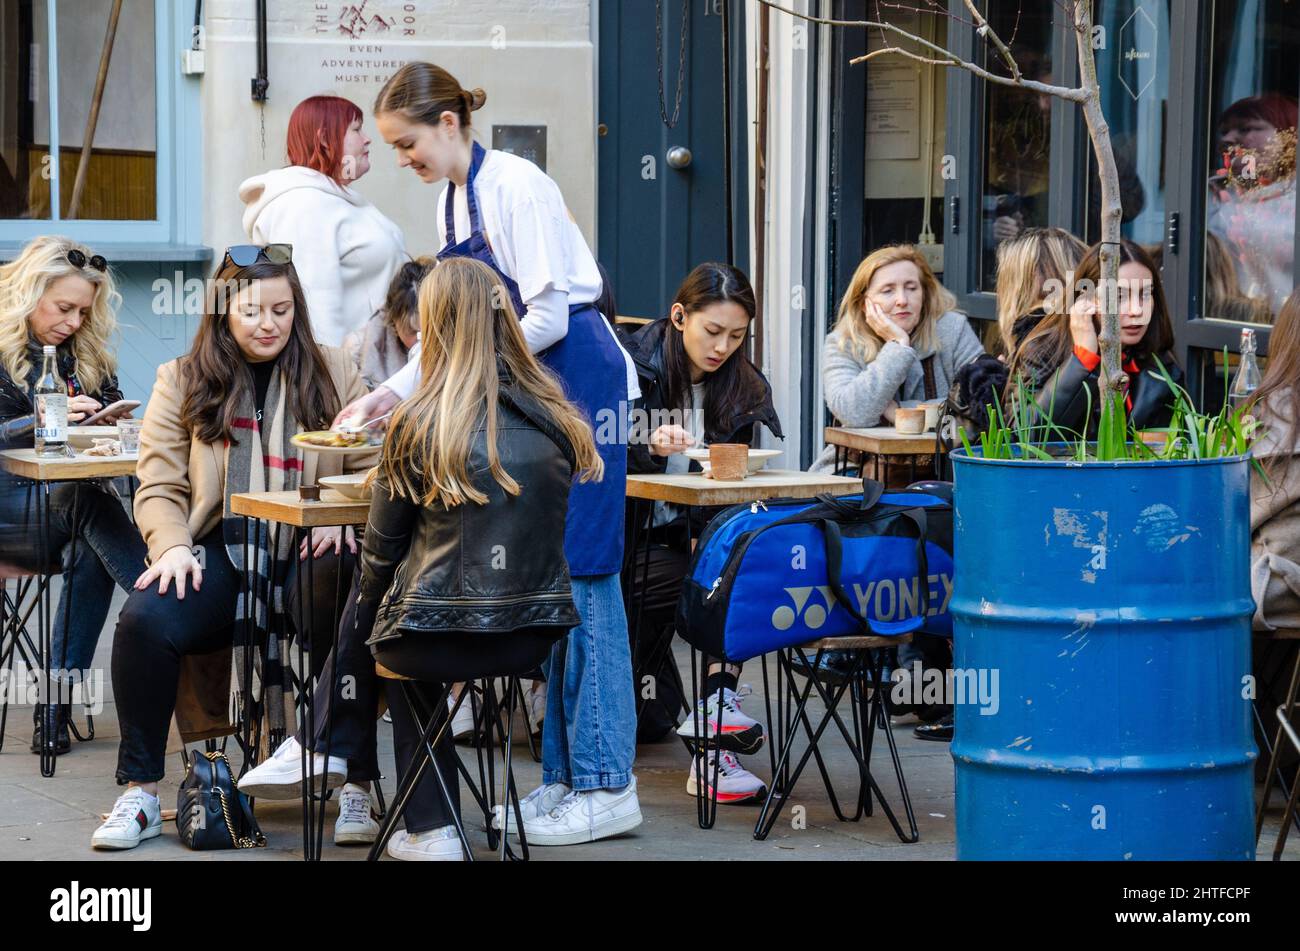 People eating outside at a cafe in Neal's Yard near Covent Garden in London, UK. Stock Photo